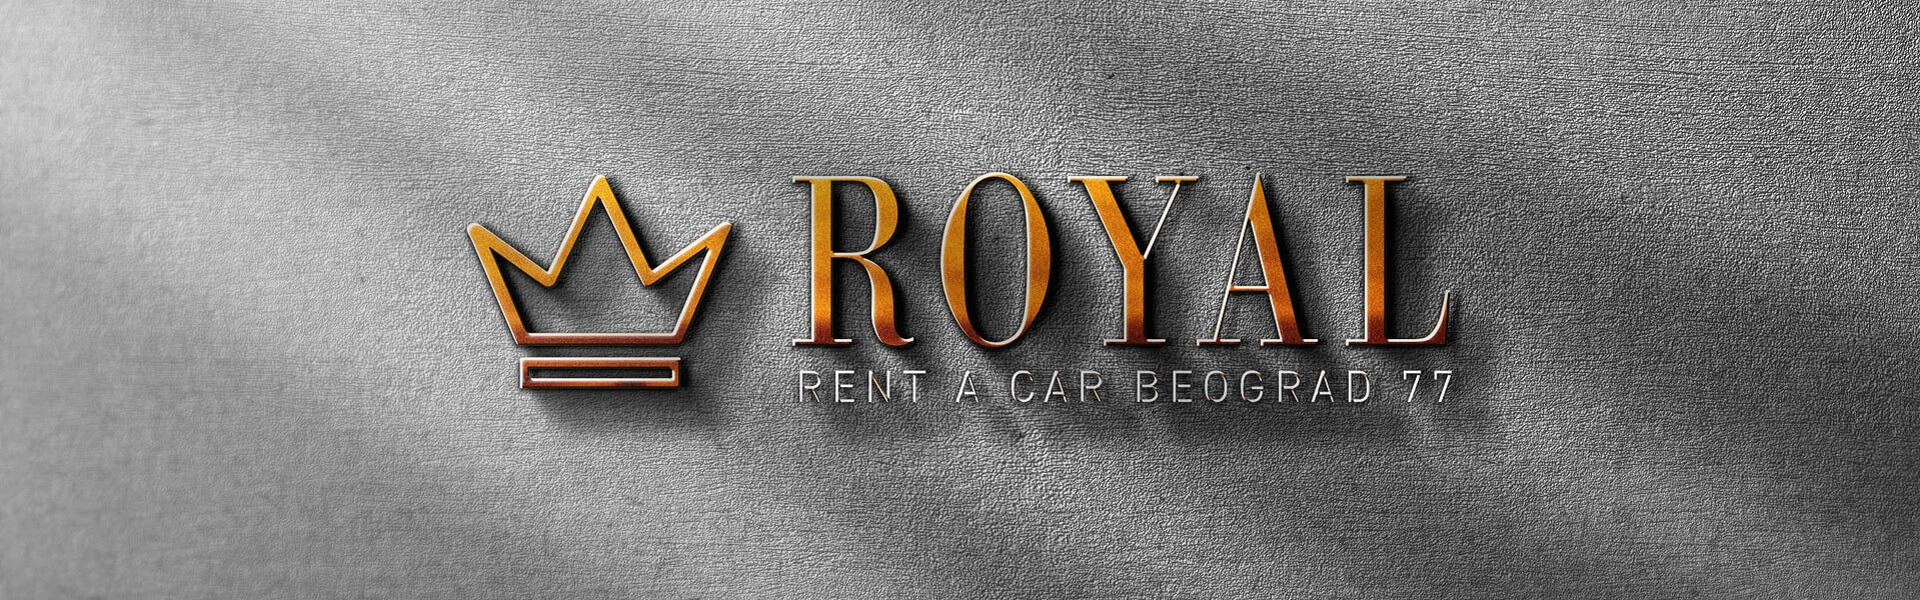 Chess Lessons | Rent a car Beograd Royal